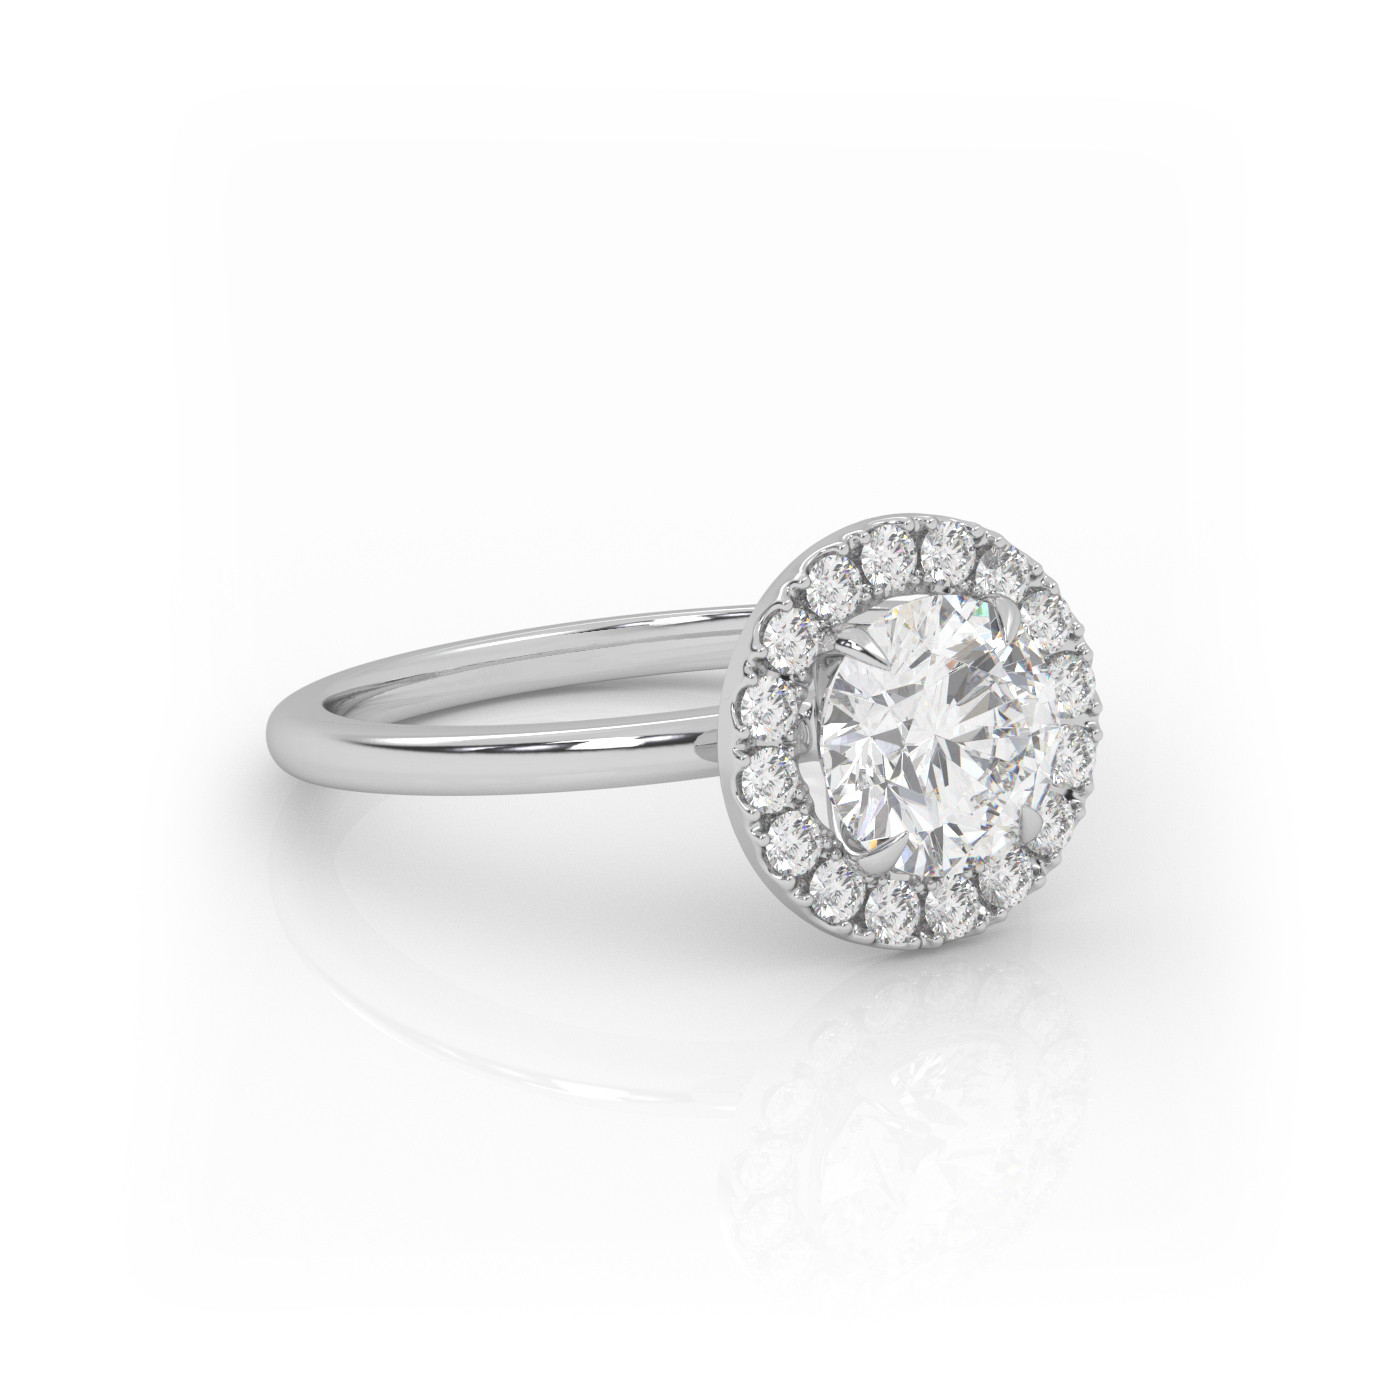 18K WHITE GOLD Round Diamond Cut Engagement Ring with Halo Style